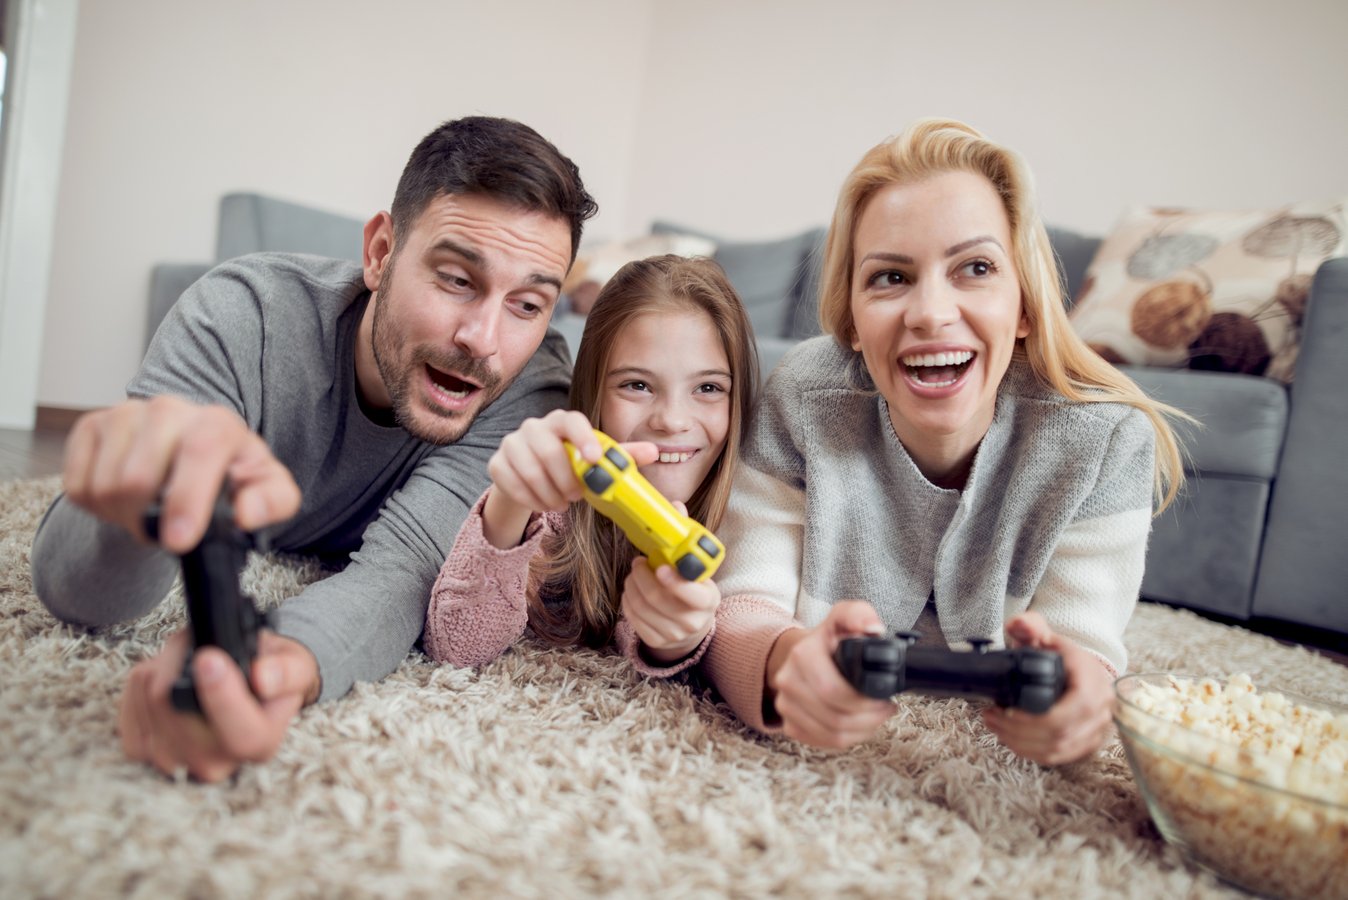 Playful family playing video games together in living room.